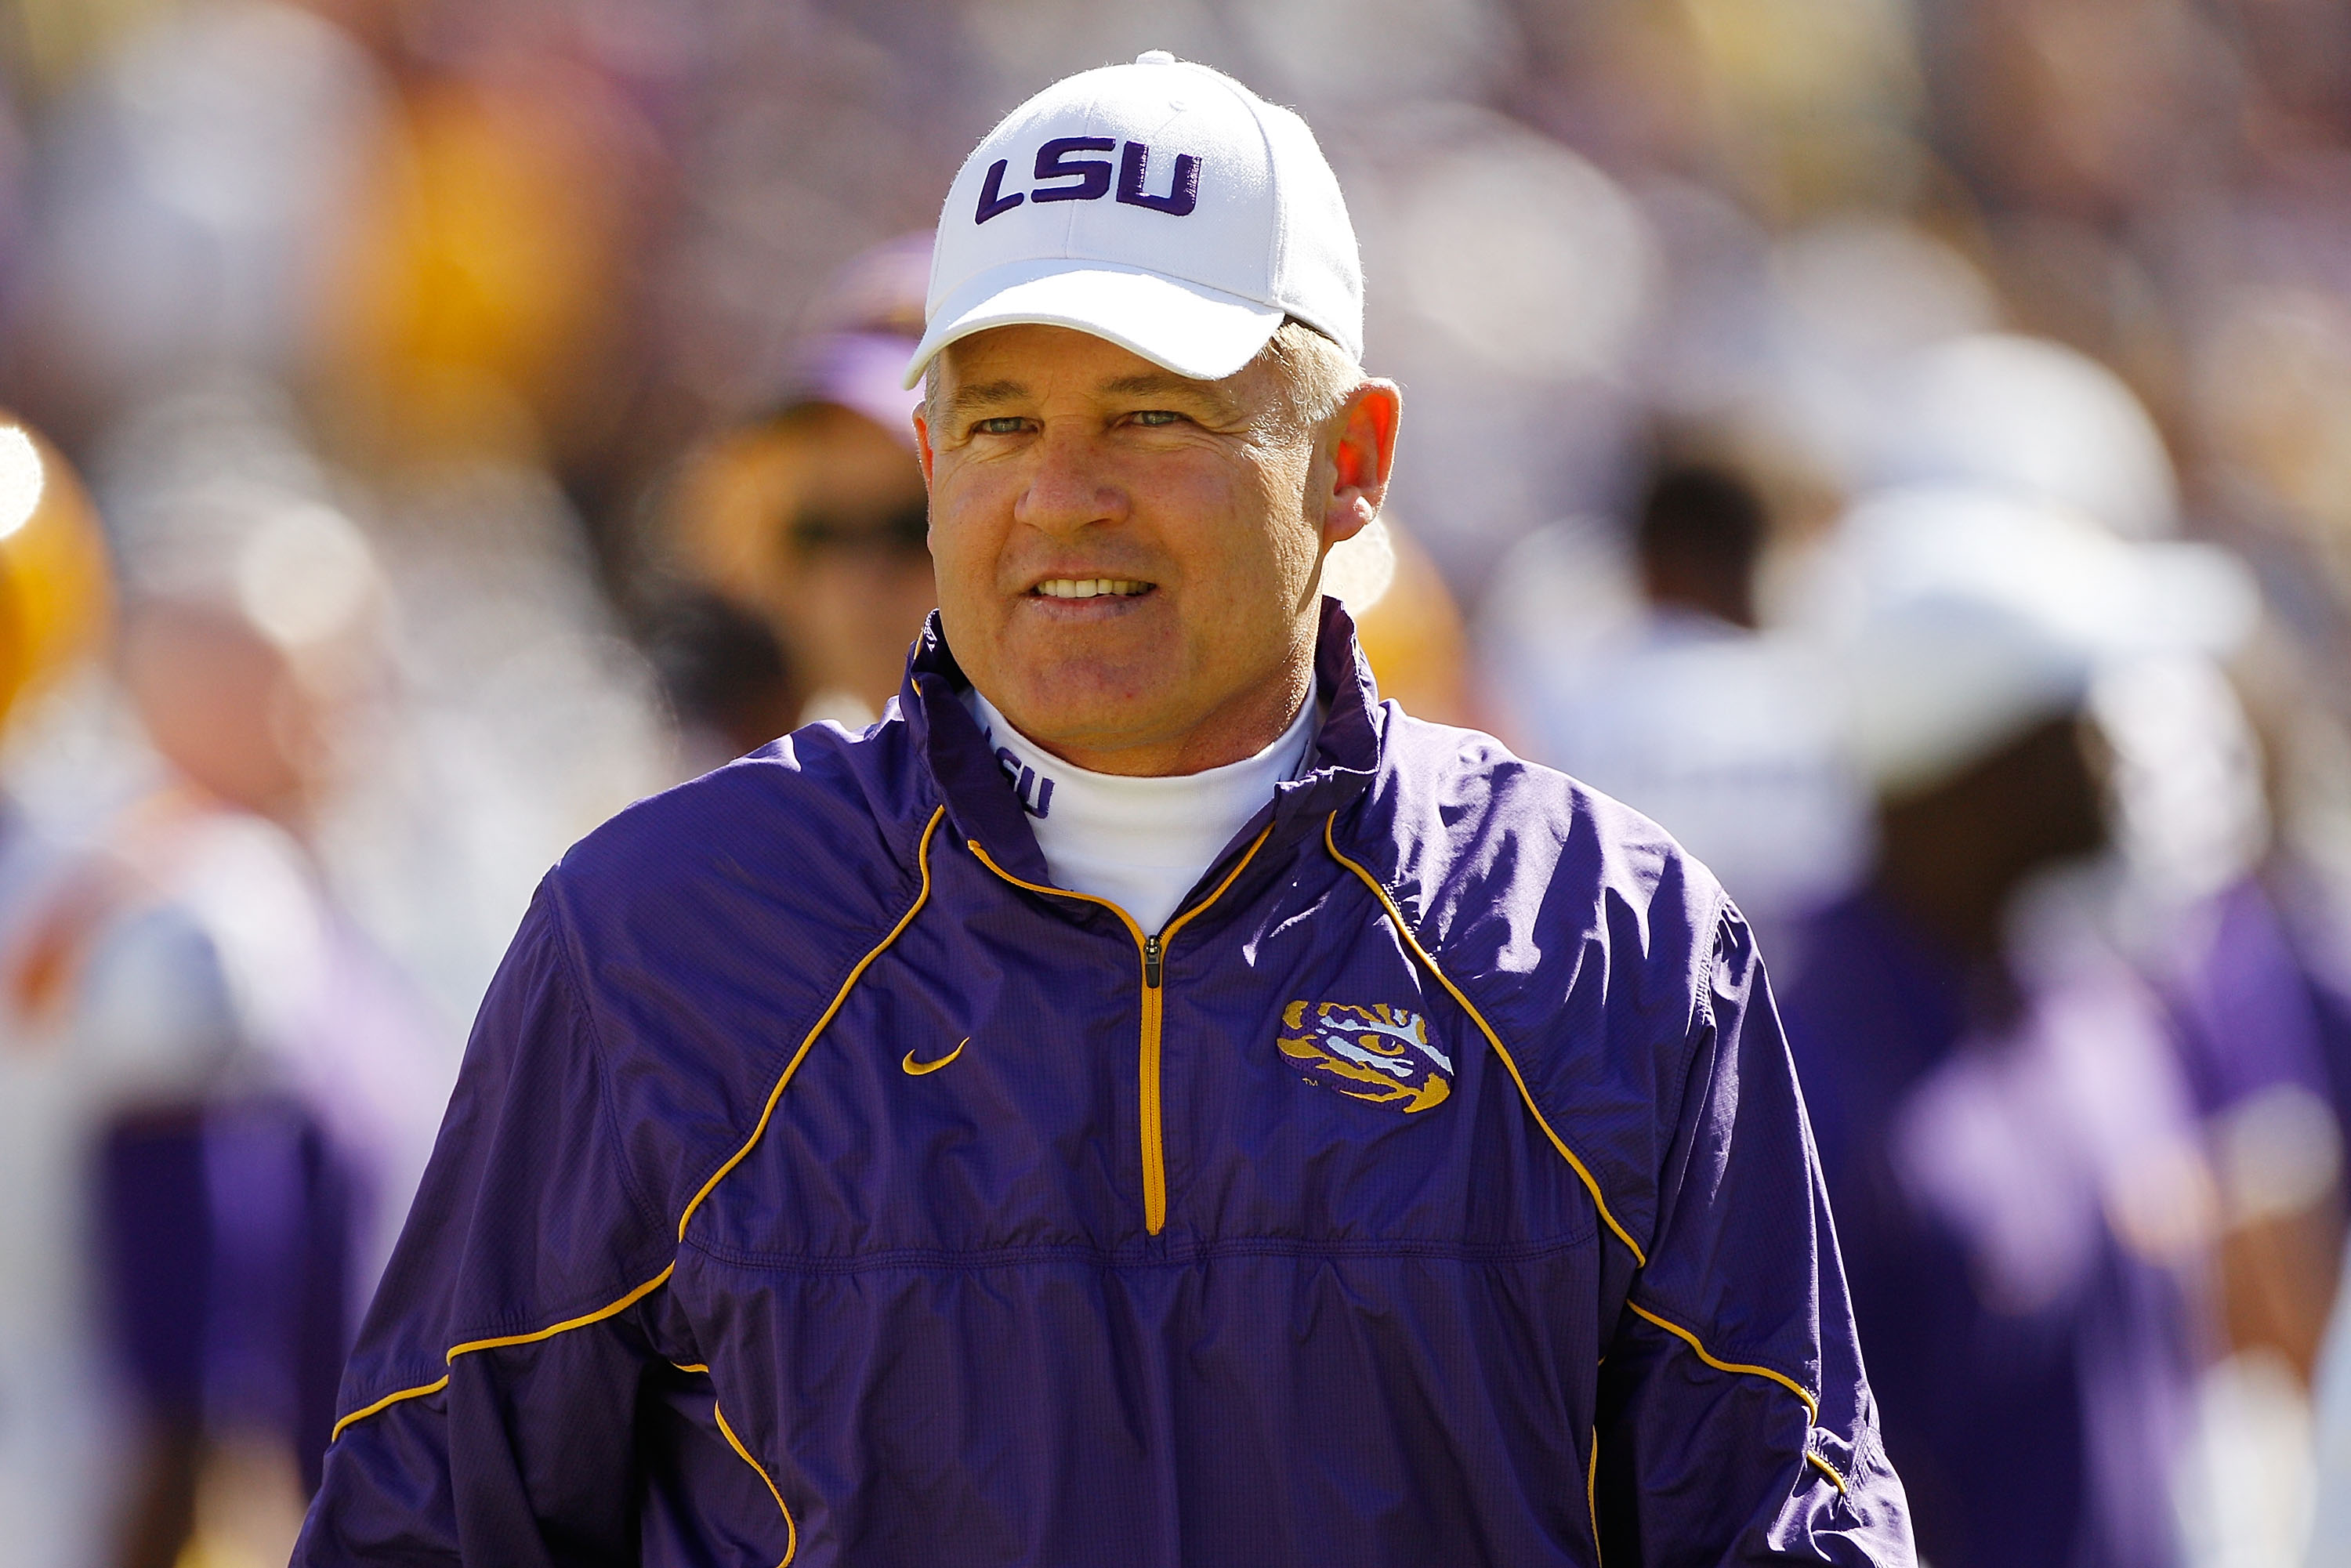 BATON ROUGE, LA - NOVEMBER 06:  Head coach Les Miles of the Louisiana State University Tigers watches pregame before playing the Alabama Crimson Tide  at Tiger Stadium on November 6, 2010 in Baton Rouge, Louisiana.  (Photo by Chris Graythen/Getty Images)